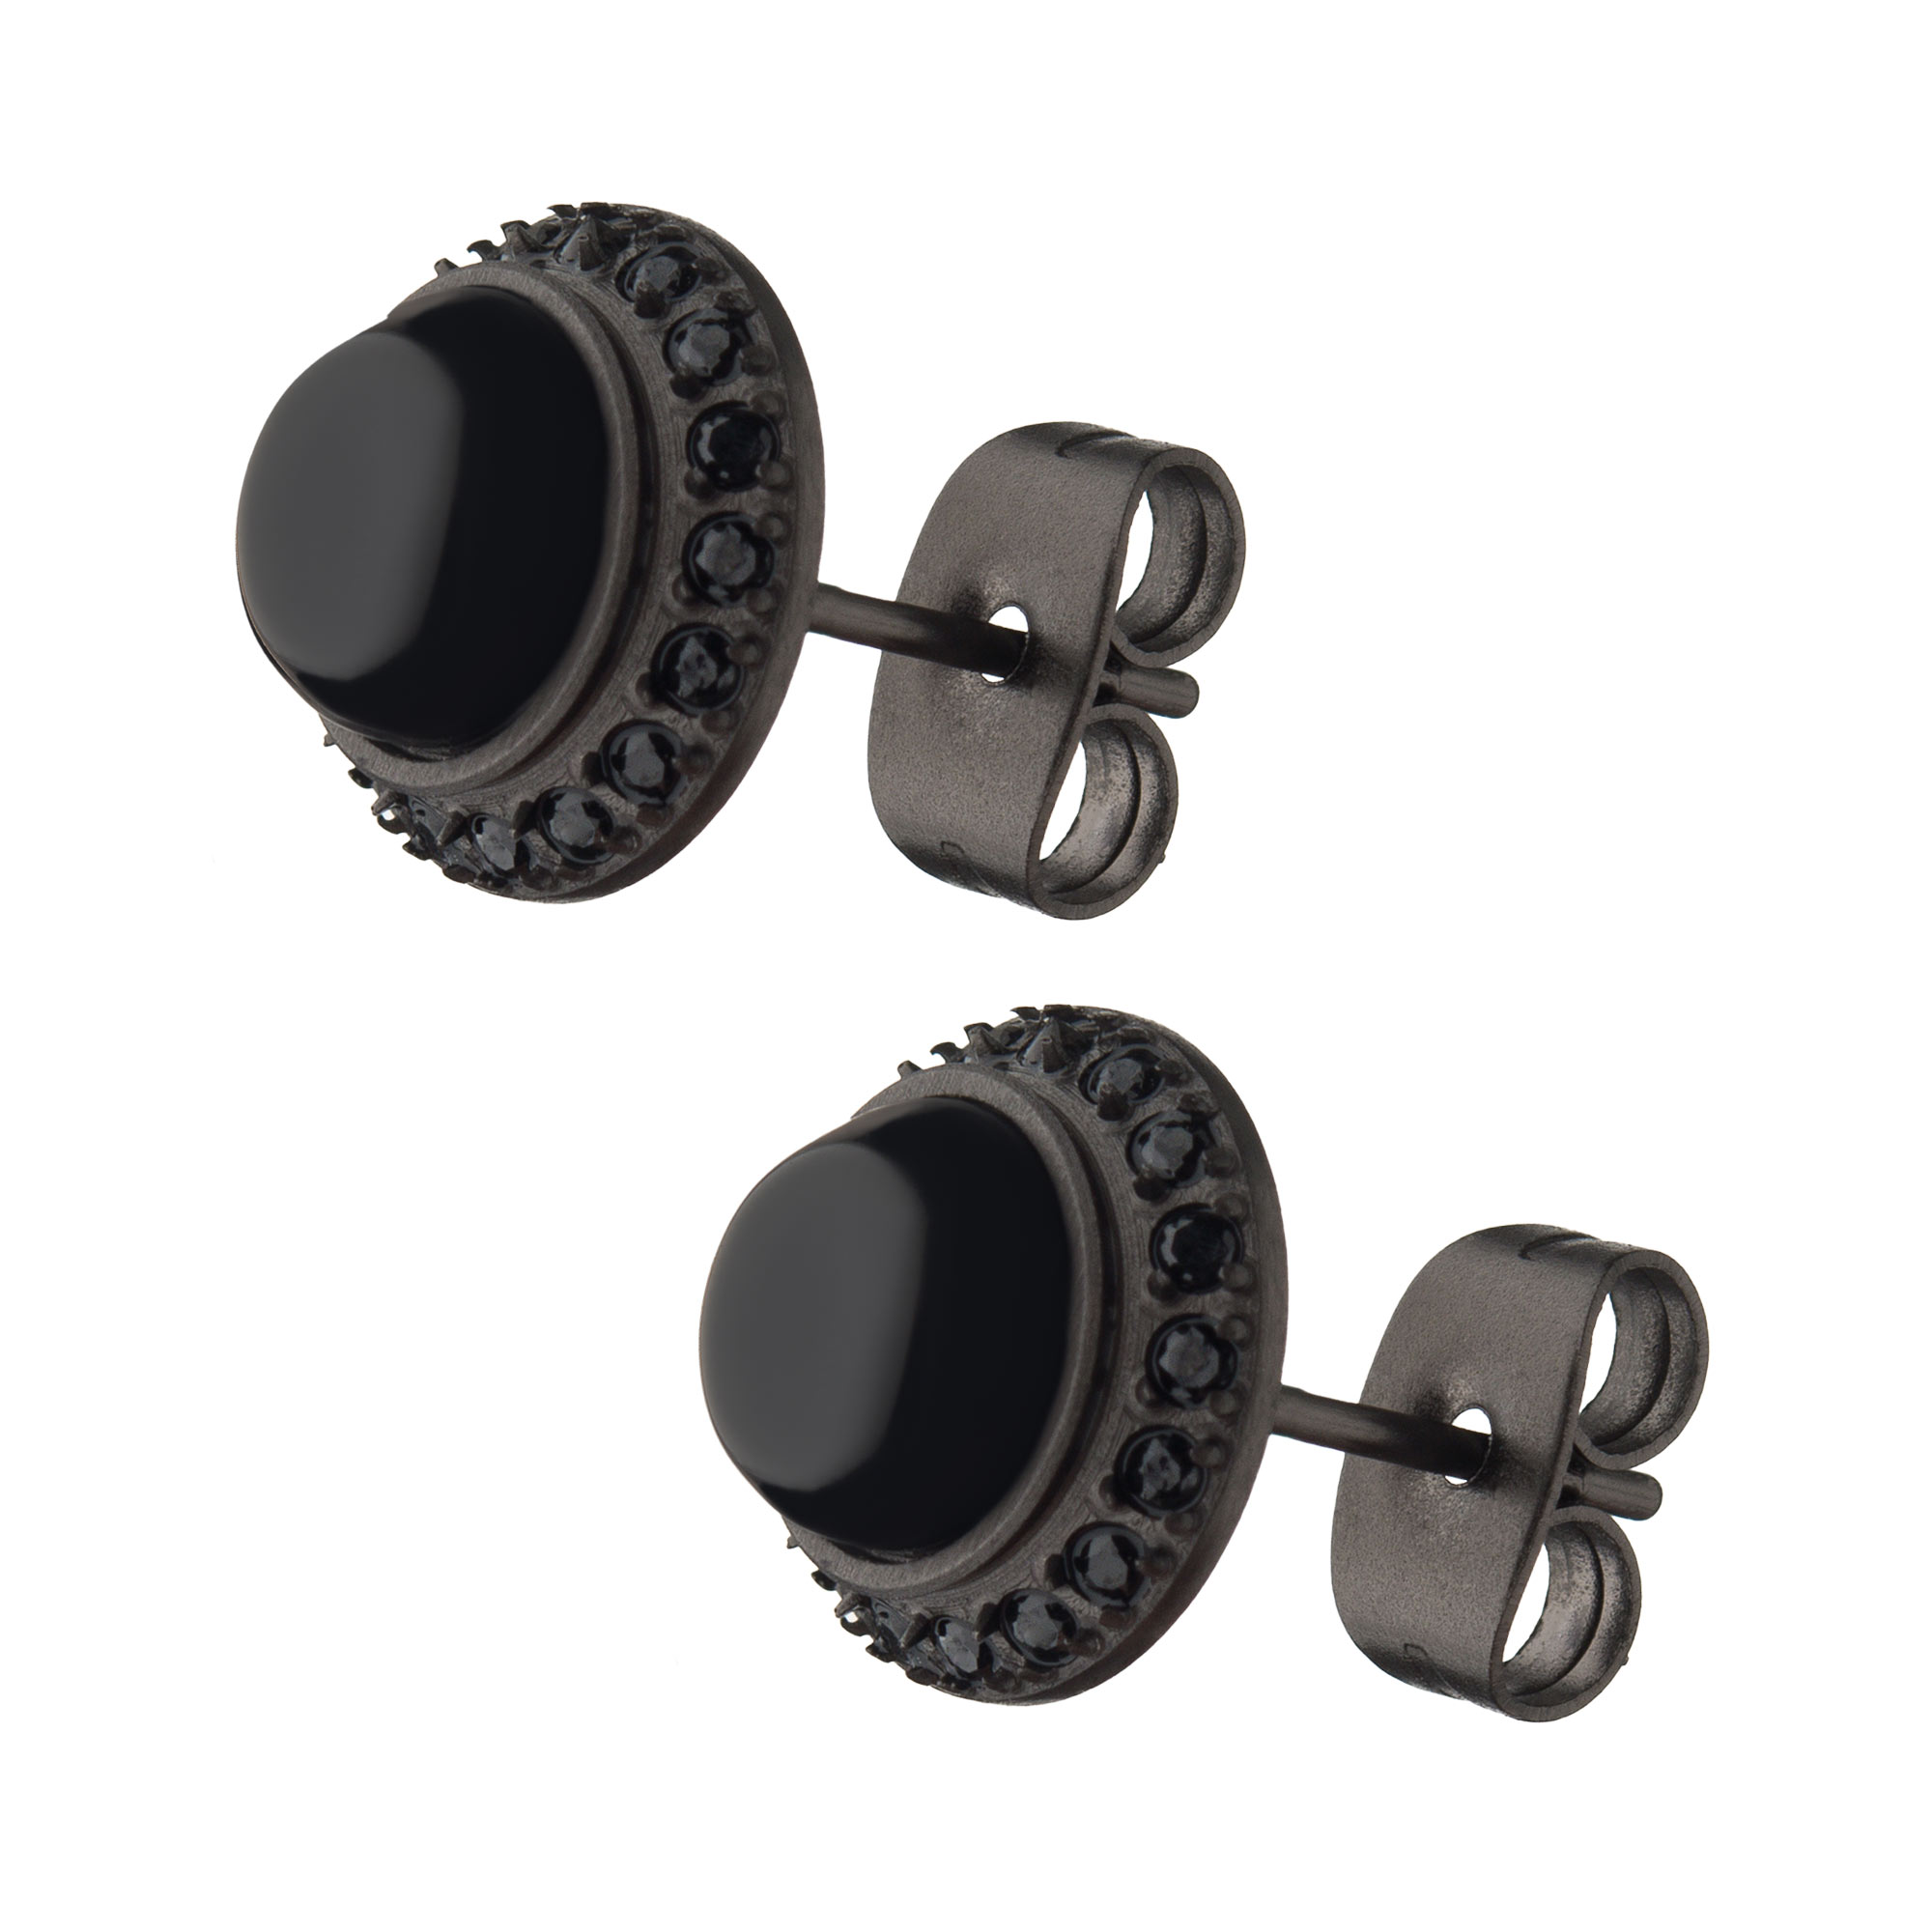 Stainless Steel Antique Bronze Plated with Black CZ Stud Earrings Image 2 Enchanted Jewelry Plainfield, CT